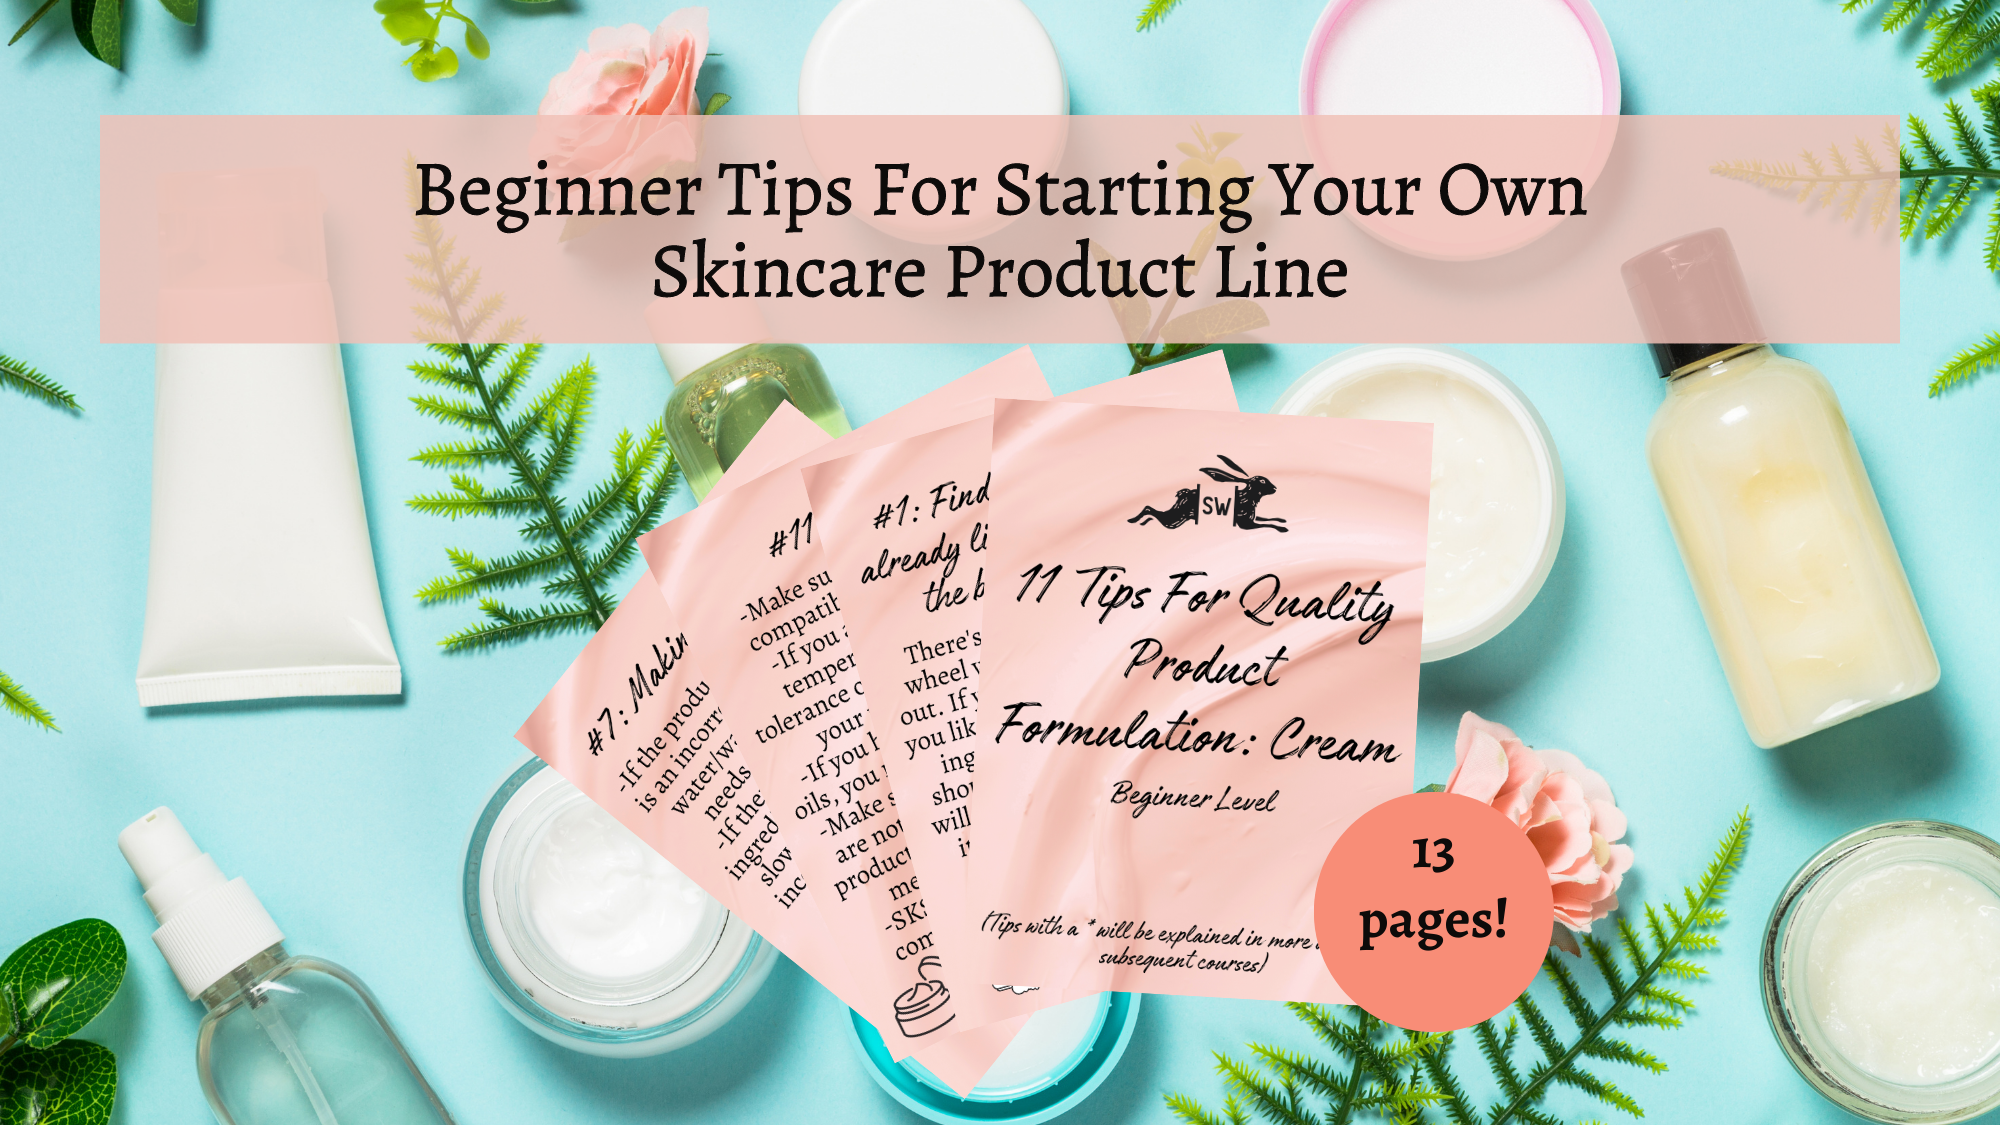 Beginner Tips For Product Formulation, Cosmetic Chemistry, Personal Beauty Skincare Product Line How to, Formulation Chemistry Tips How-To